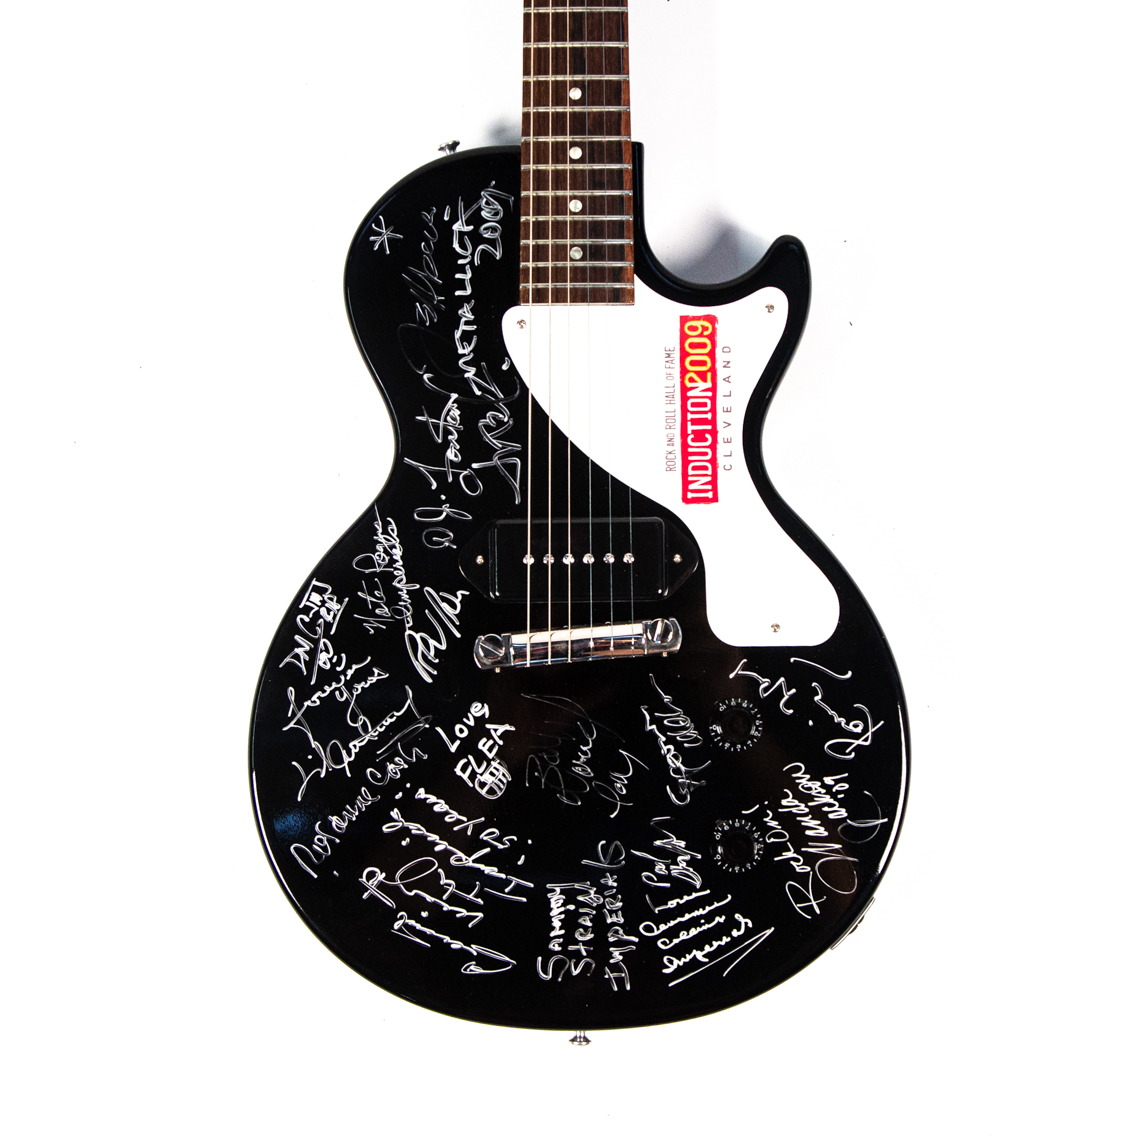 Gibson LP Jr. autographed by the 2009 ceremony's Inductees and presenters